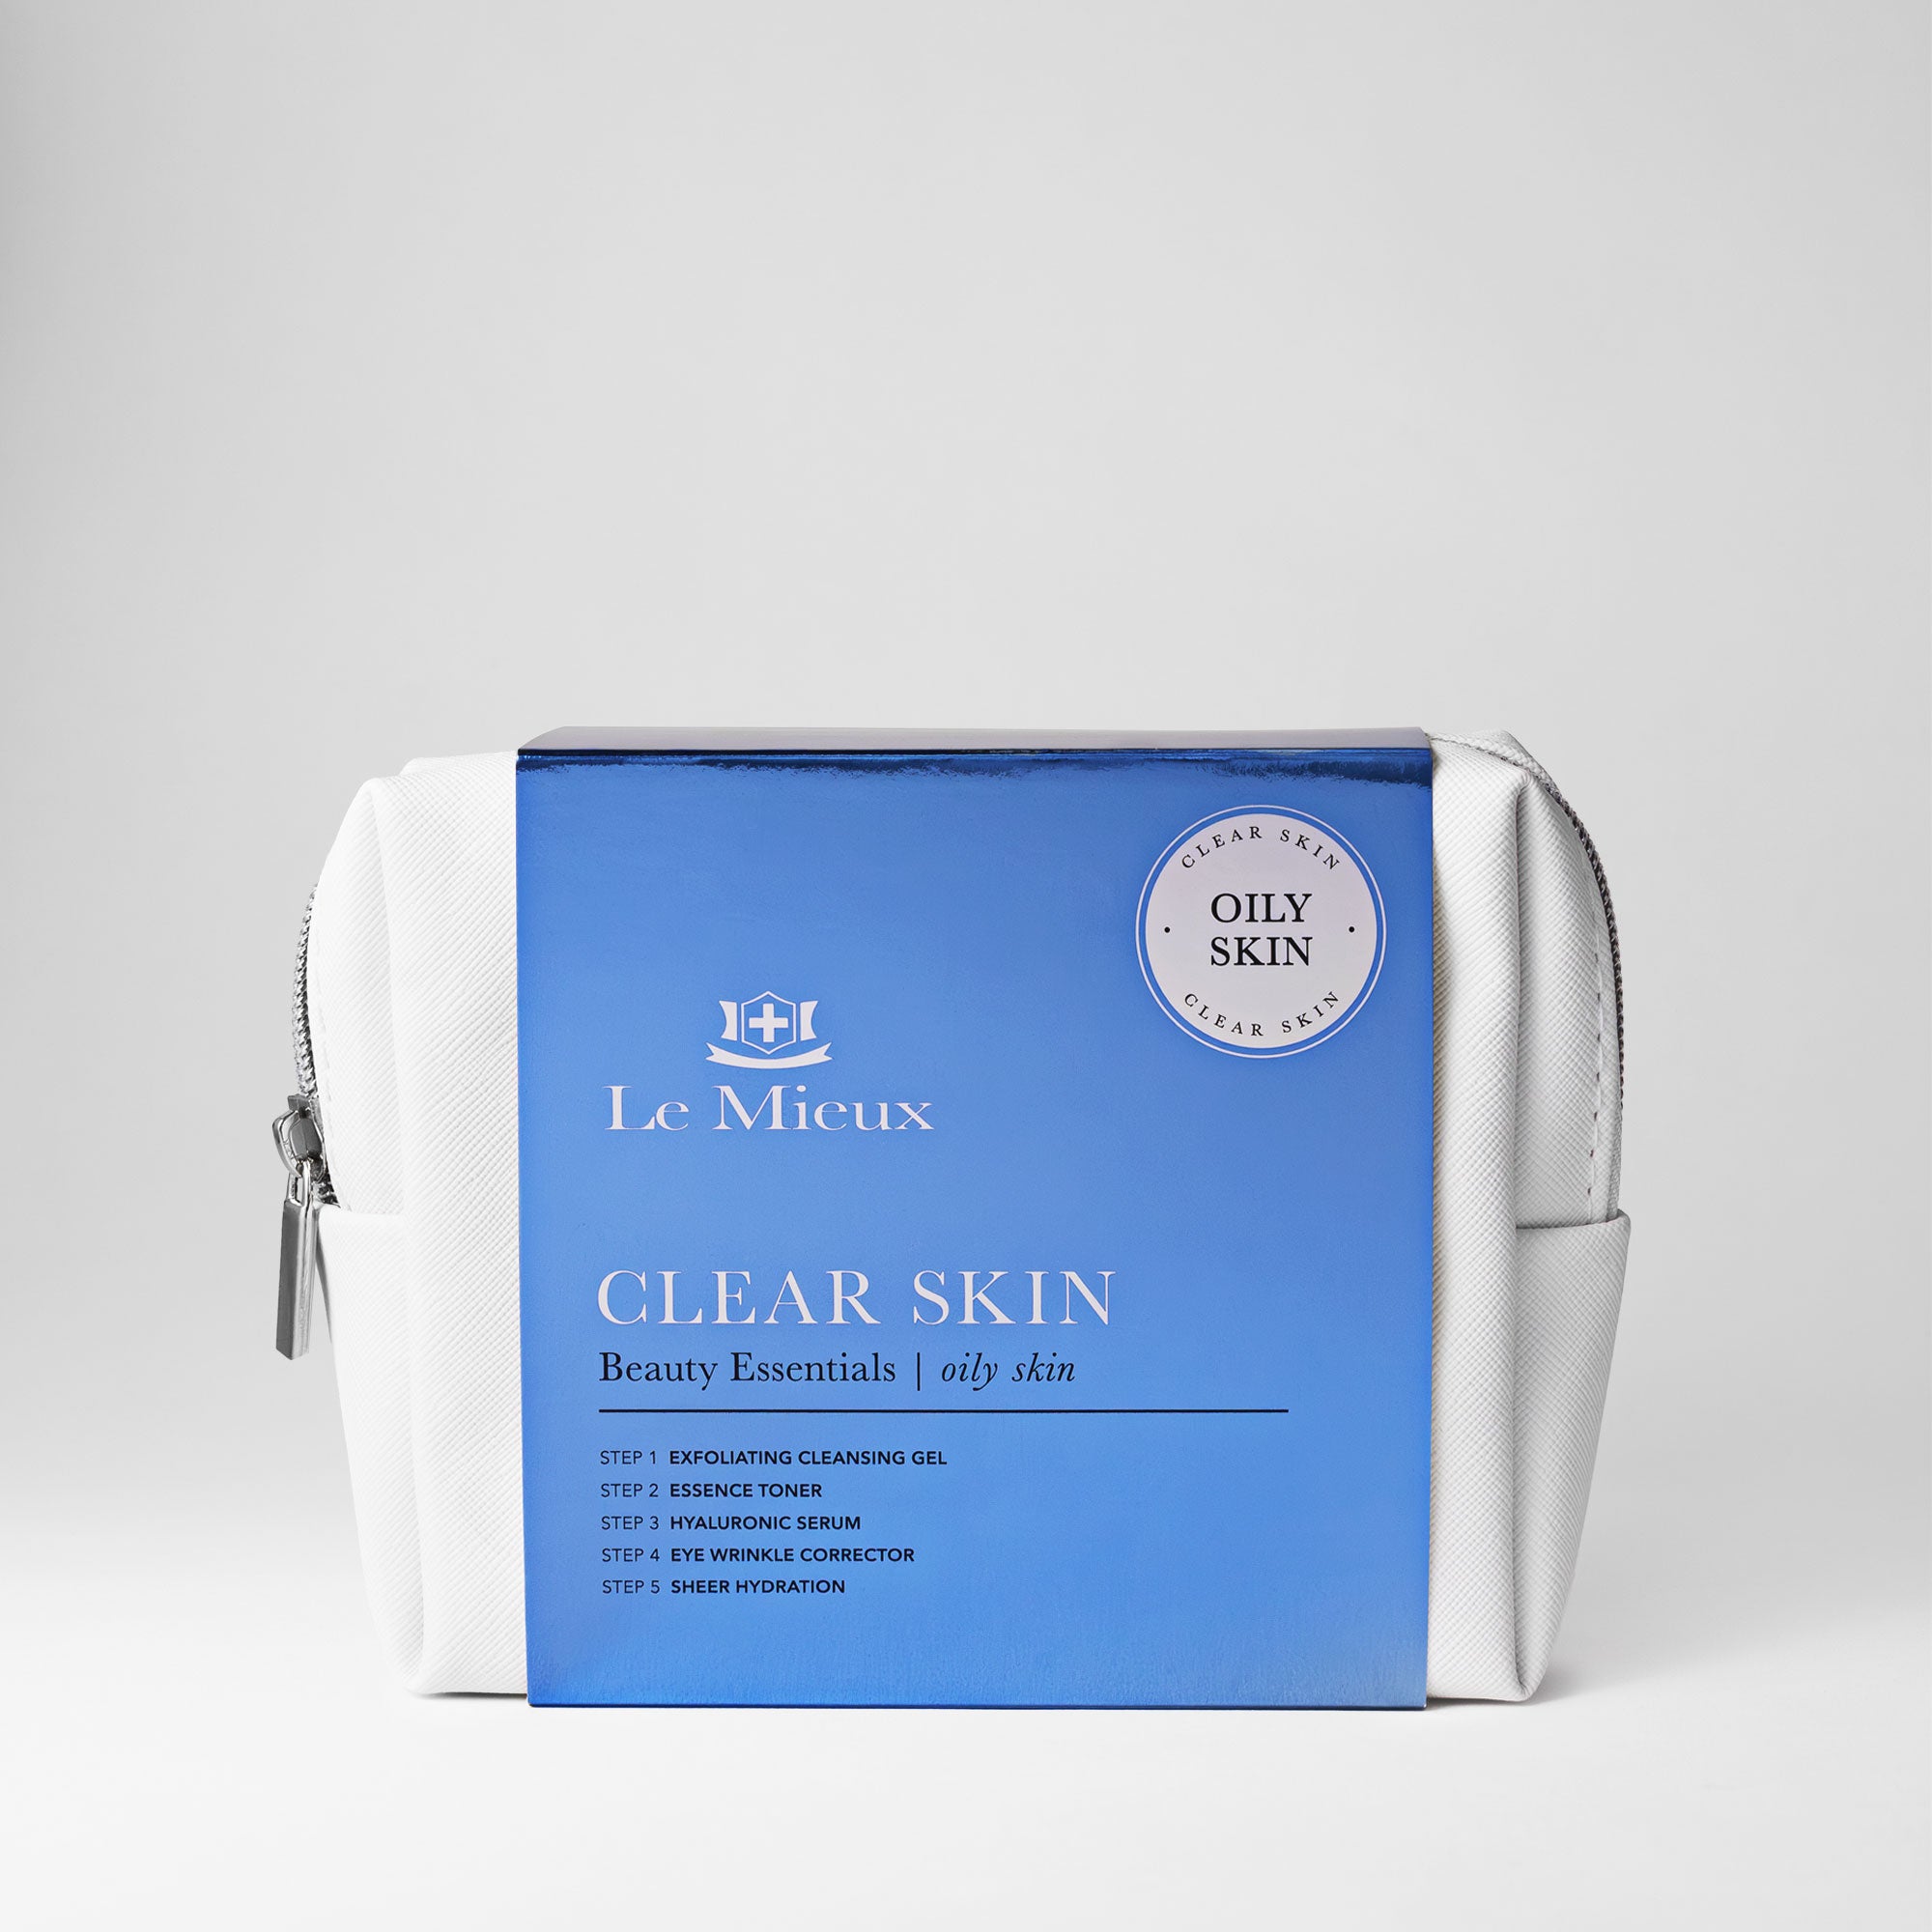  CLEAR SKIN BEAUTY ESSENTIALS from Le Mieux Skincare - 1